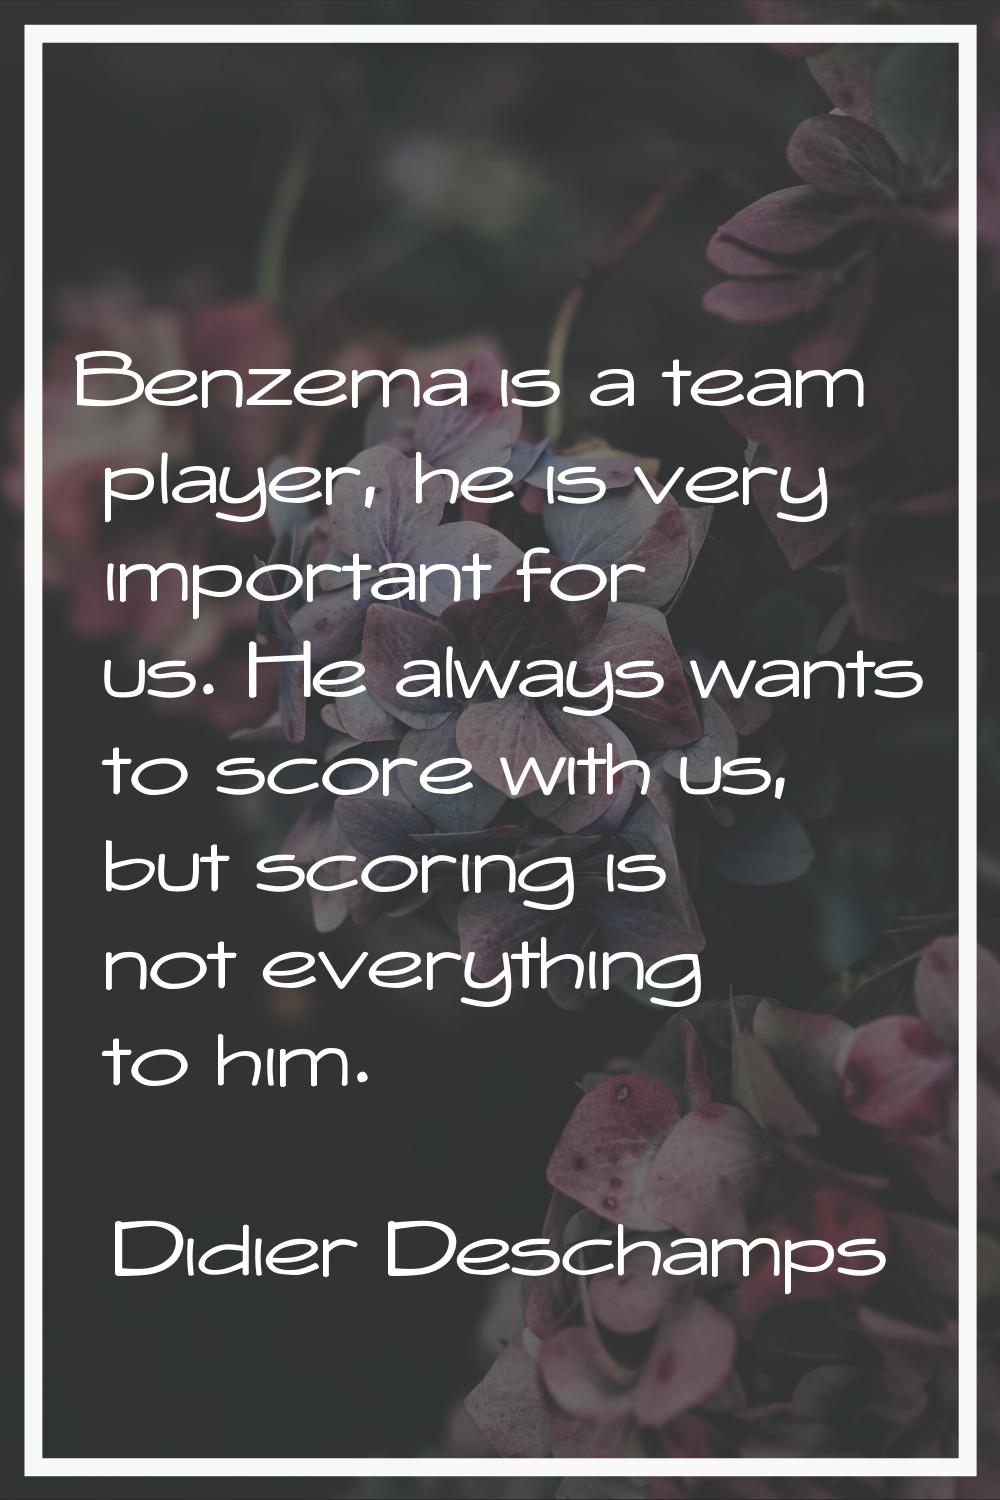 Benzema is a team player, he is very important for us. He always wants to score with us, but scorin